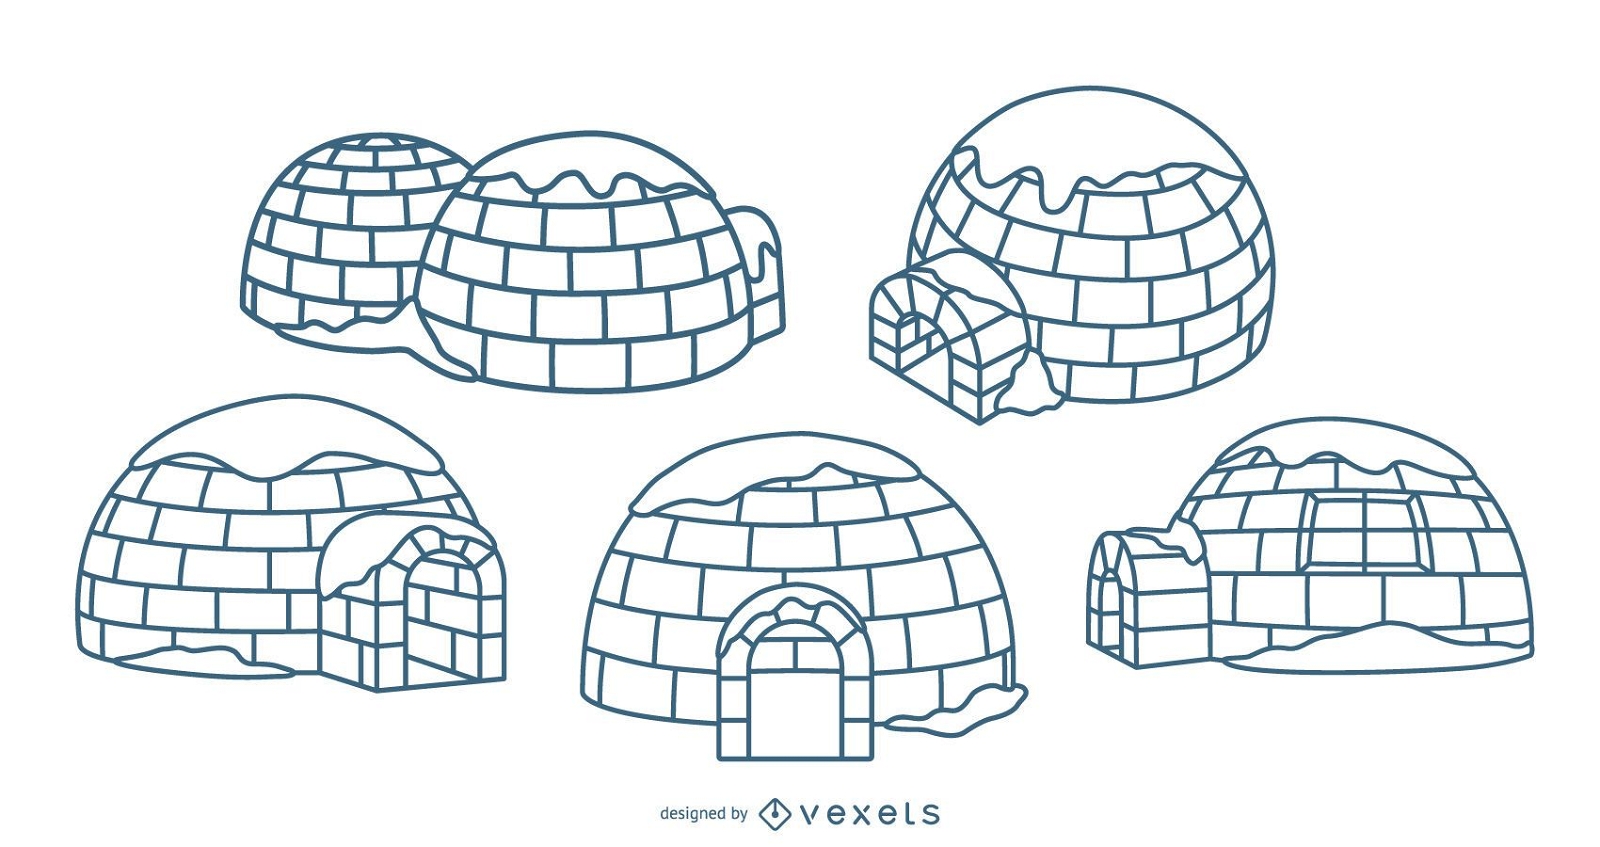 How to Draw an Igloo - Easy Drawing Art